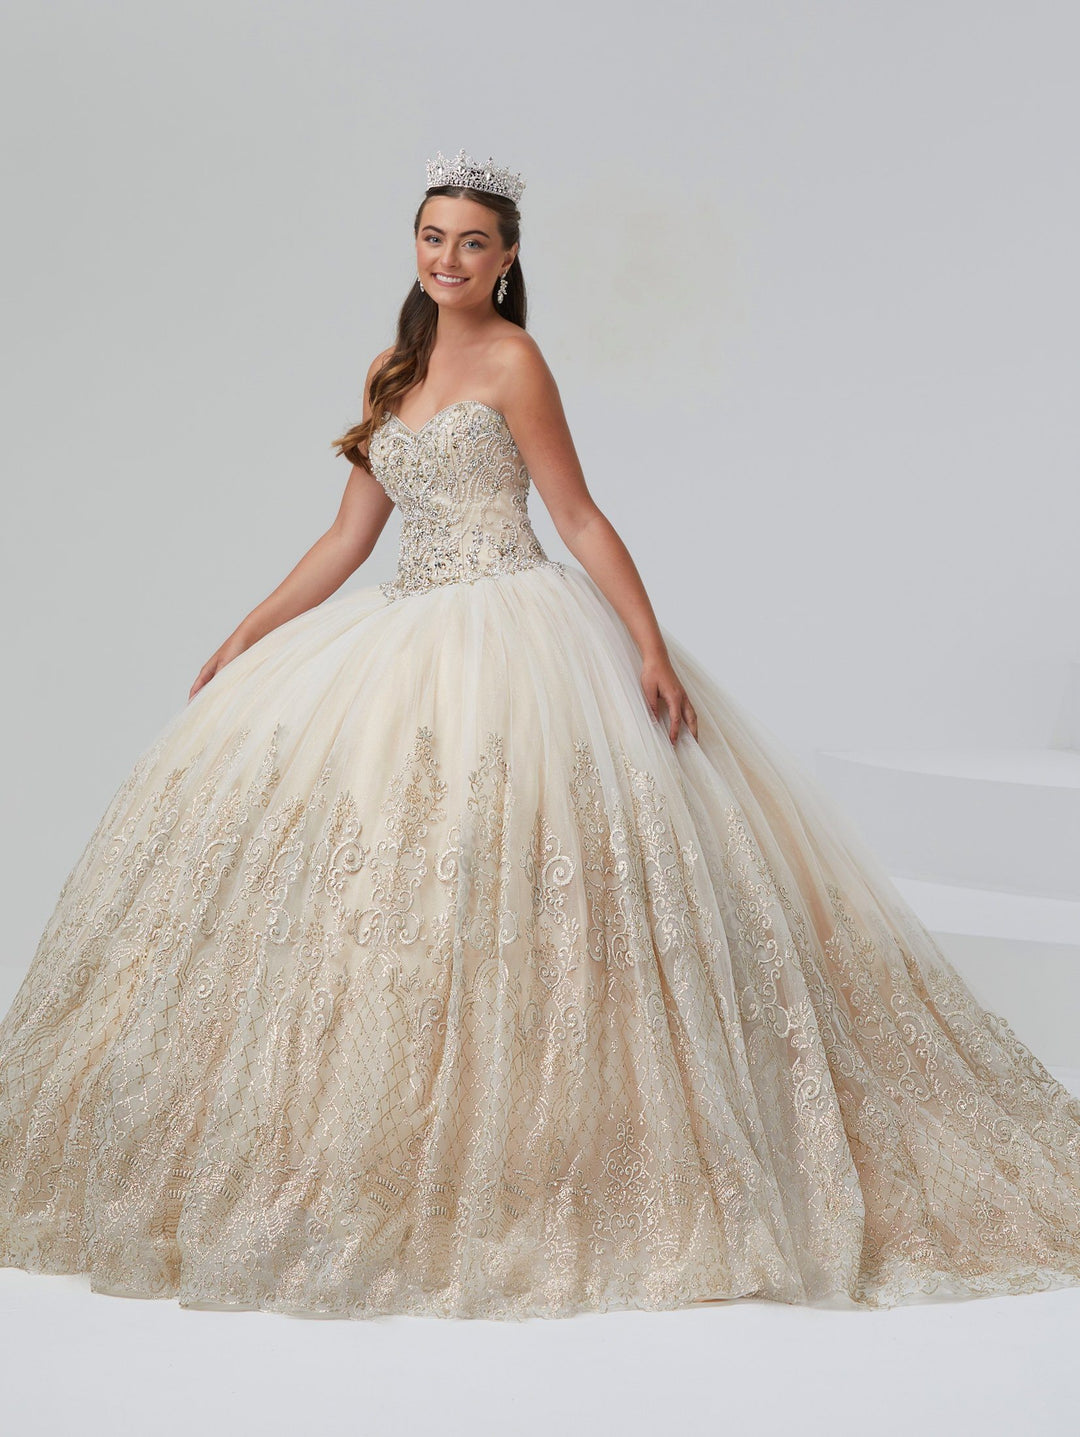 Strapless Quinceanera Dress by House of Wu 26988